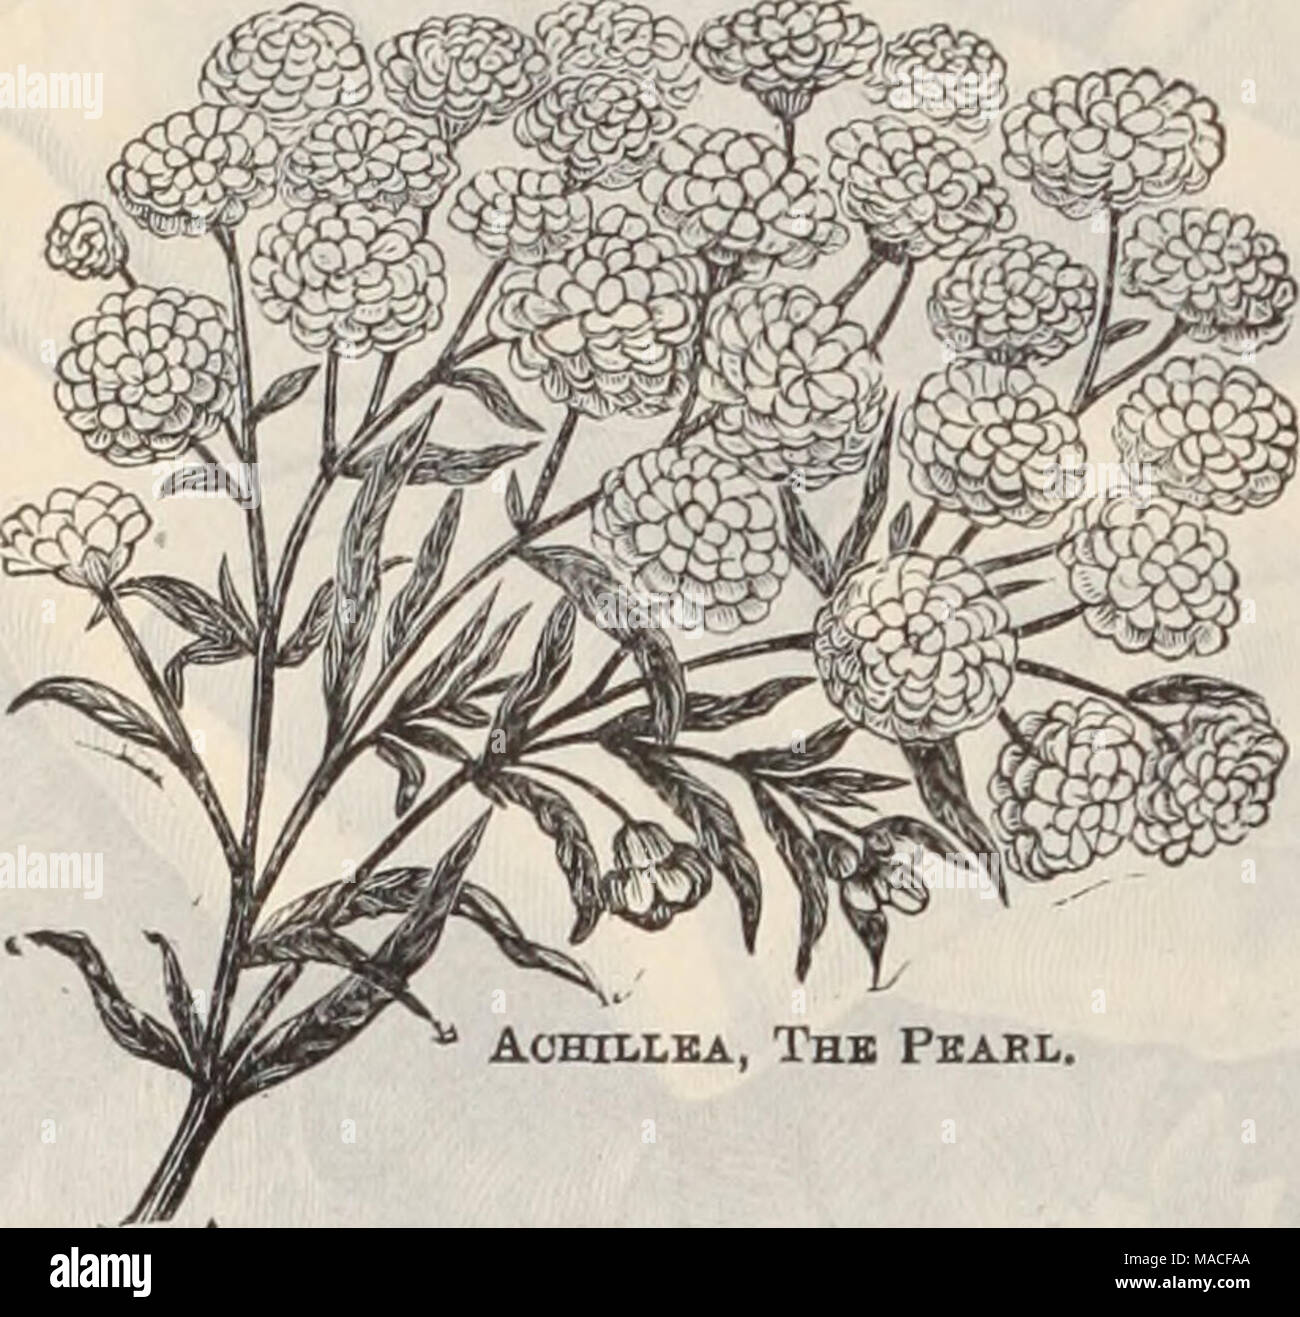 . Dreer's wholesale price list / Henry A. Dreer. . Achillea, Thb Pbabl. Achillea. (Milfoil.) Pertloz. Per loo. Filipendulina. Strong divisions 5 75 oo Millefolium Roseum. Strong divisions . 60 4 00 The Pearl. 3-inch pots 60 4 00 Tomentosum. Strong divisions i 00 8 00 Actsea. (Baneberry.) Japonica. A Japanese introduction producing dense spikes of pure white flowers not unlike our native Baneberry, but while our native species flowers during June, the Japanese form does not come into bloom until September and lasts well through October, a time when all kinds of flowers are scarce in the garden, Stock Photo